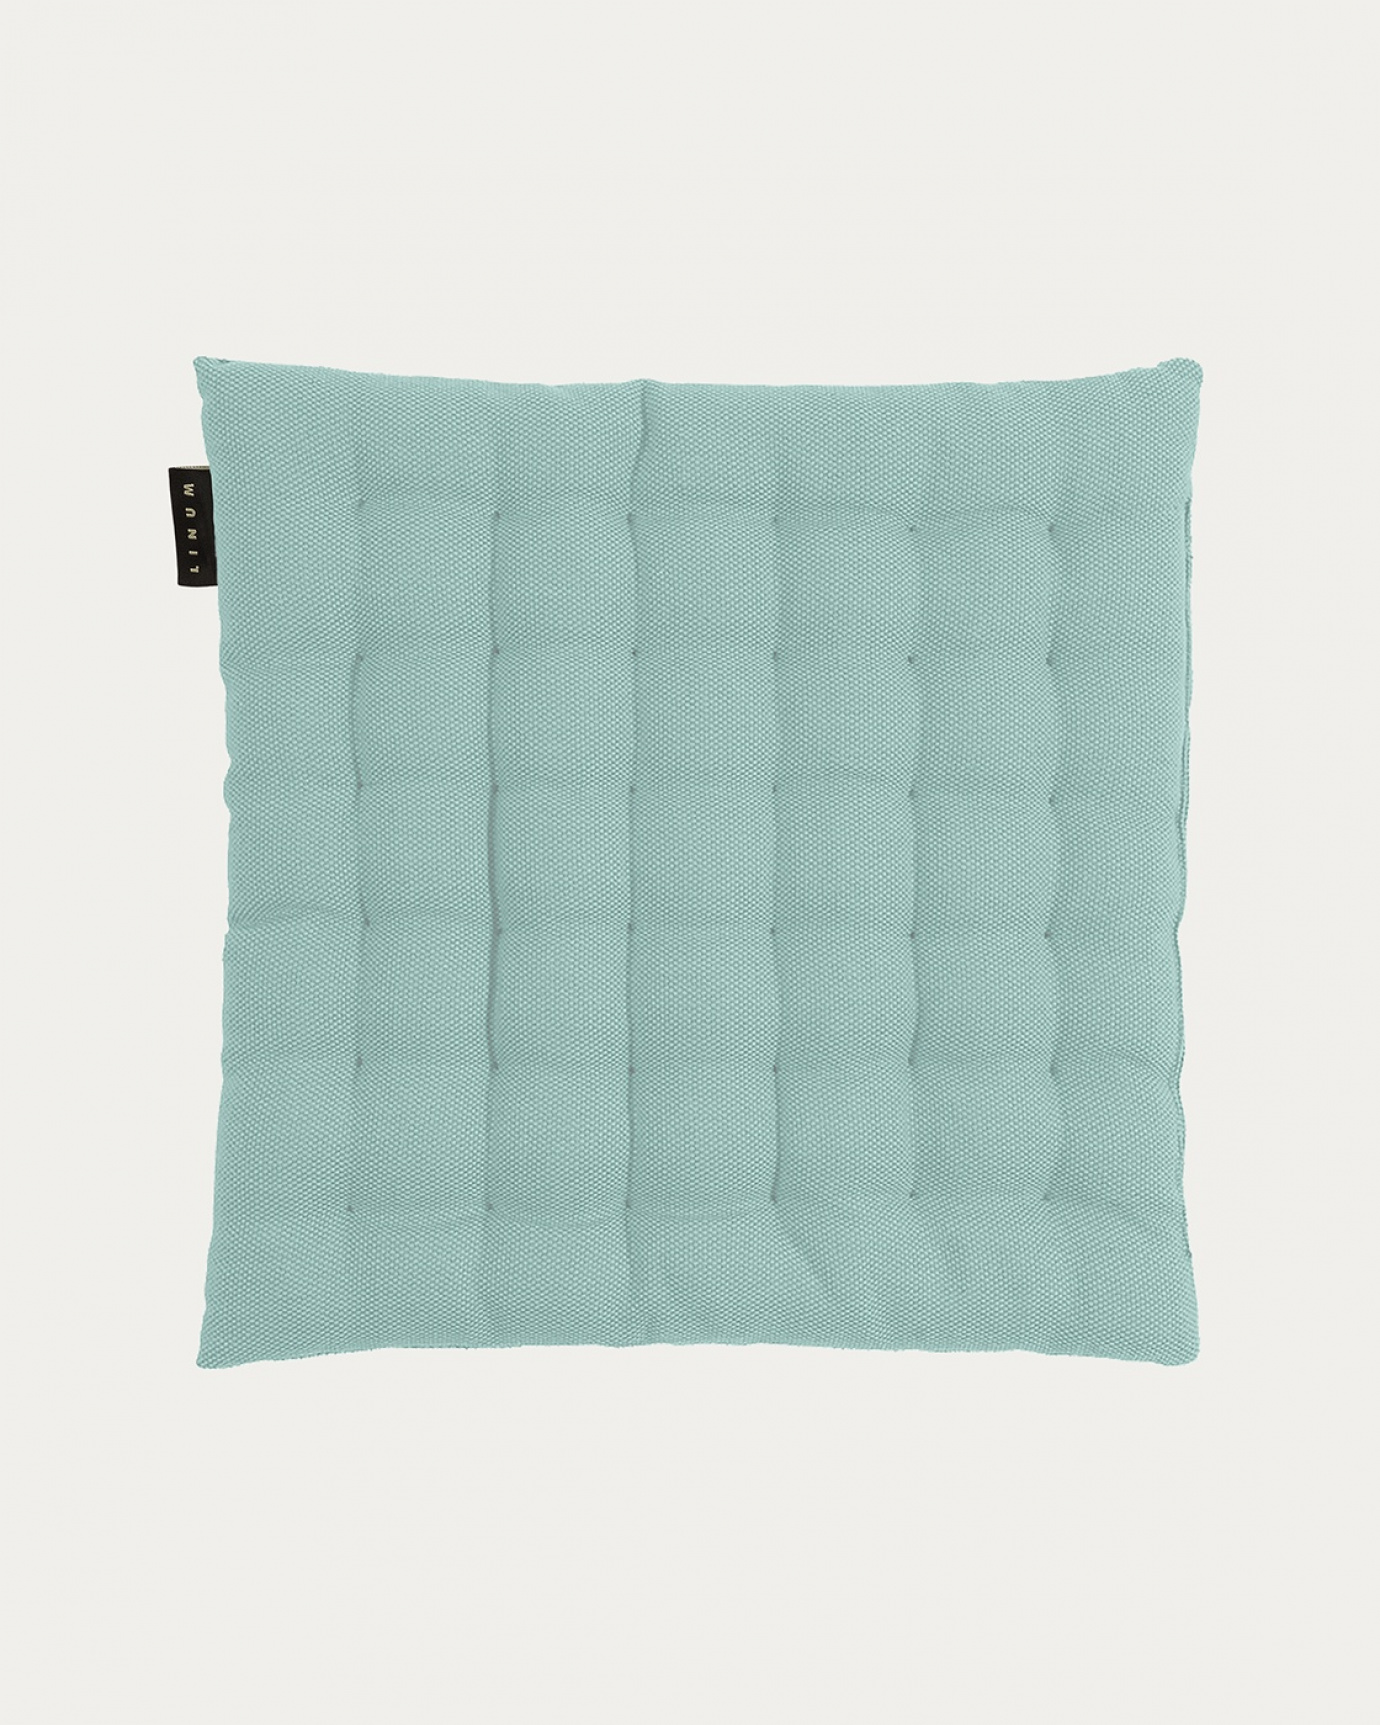 Product image dusty turquoise PEPPER seat cushion made of soft cotton with recycled polyester filling from LINUM DESIGN. Size 40x40 cm.